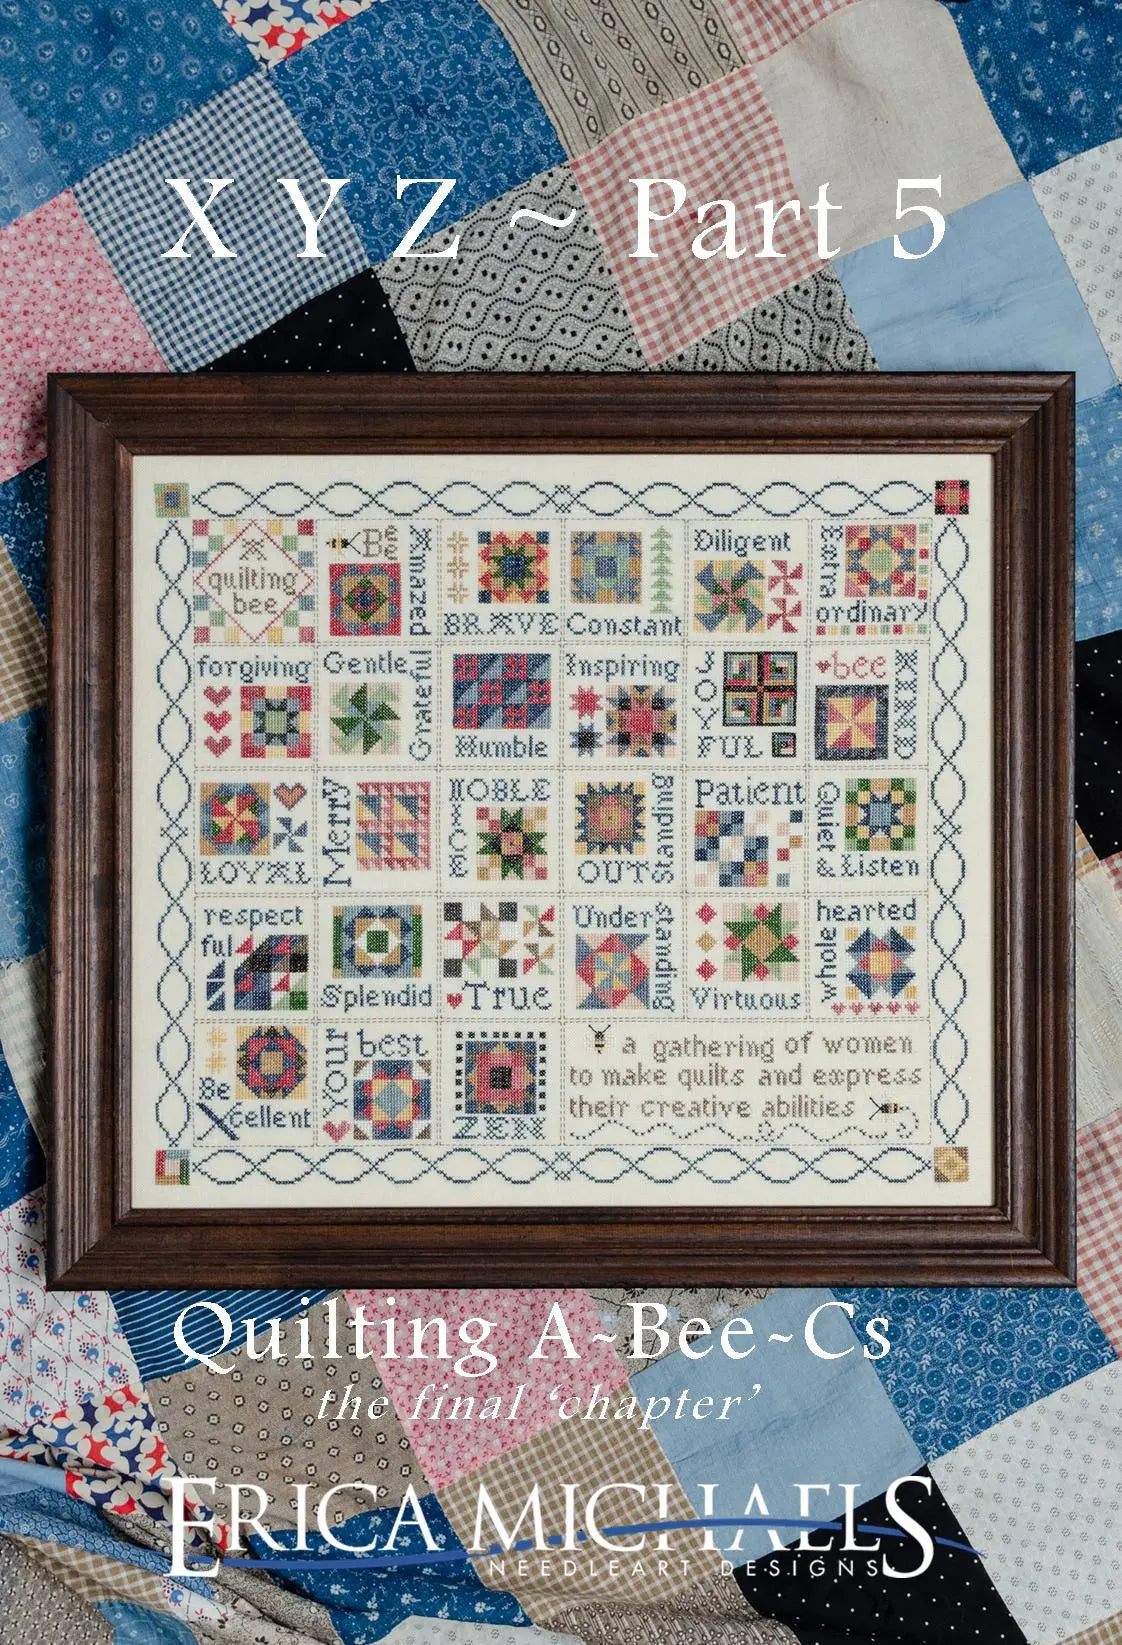 Quilting A-Bee-C's Part Five by Erica Michaels Erica Michaels